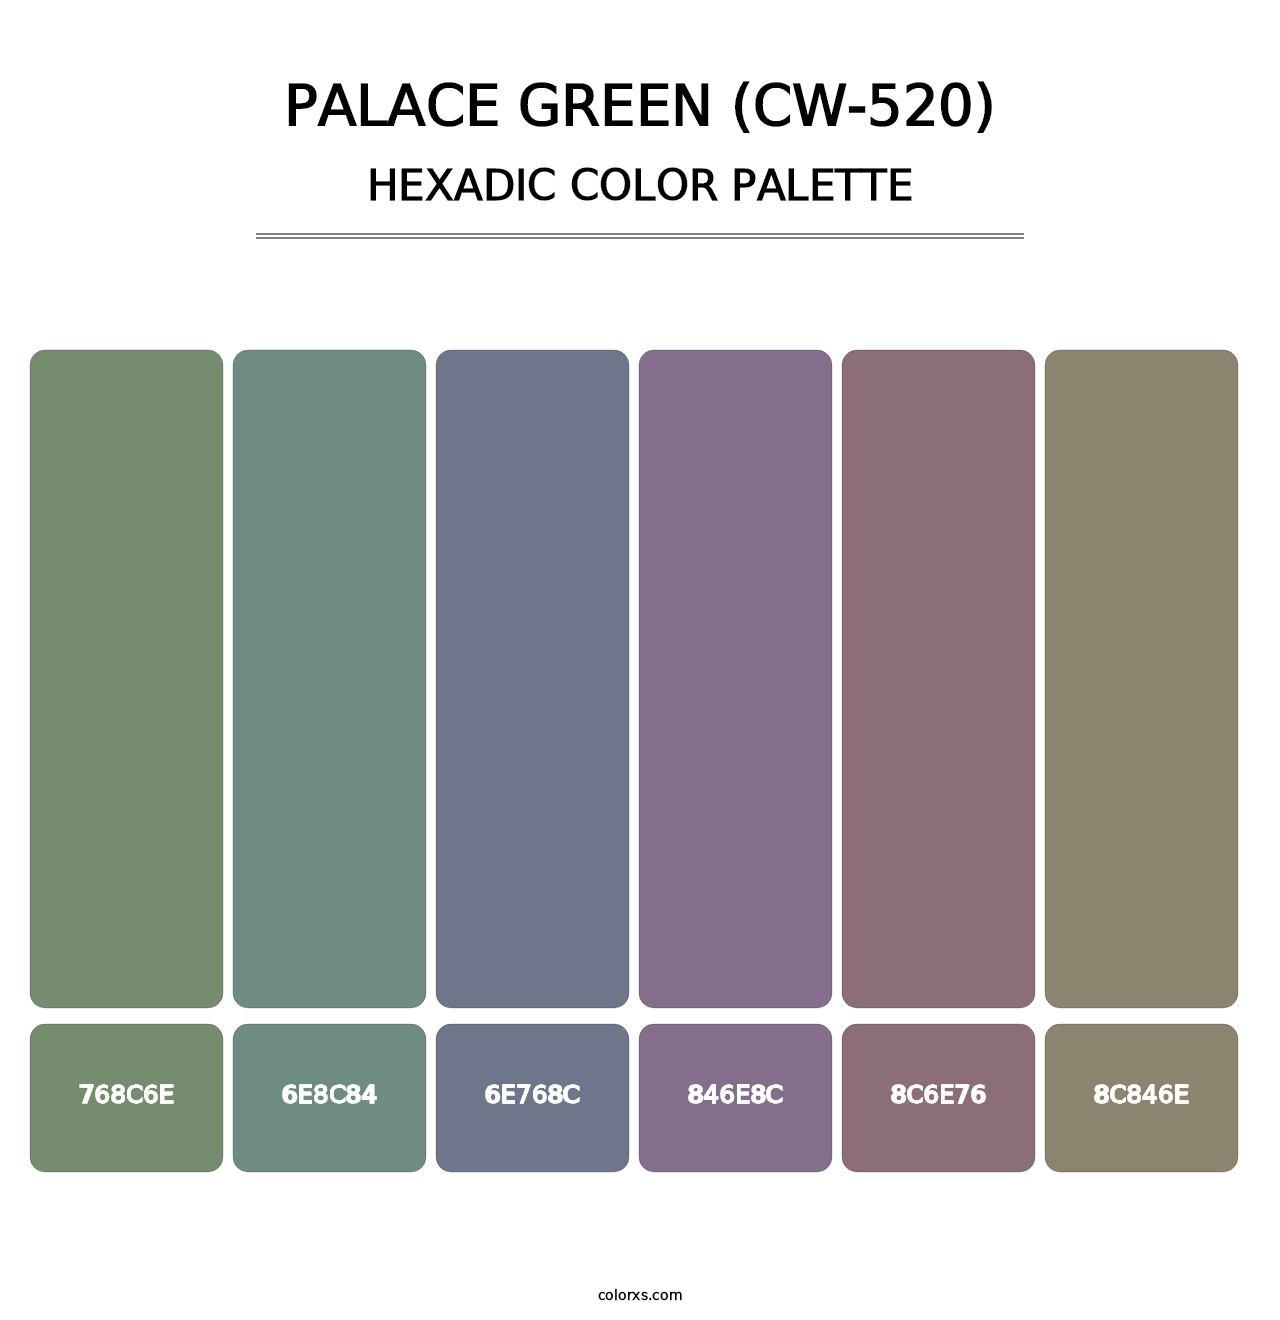 Palace Green (CW-520) - Hexadic Color Palette